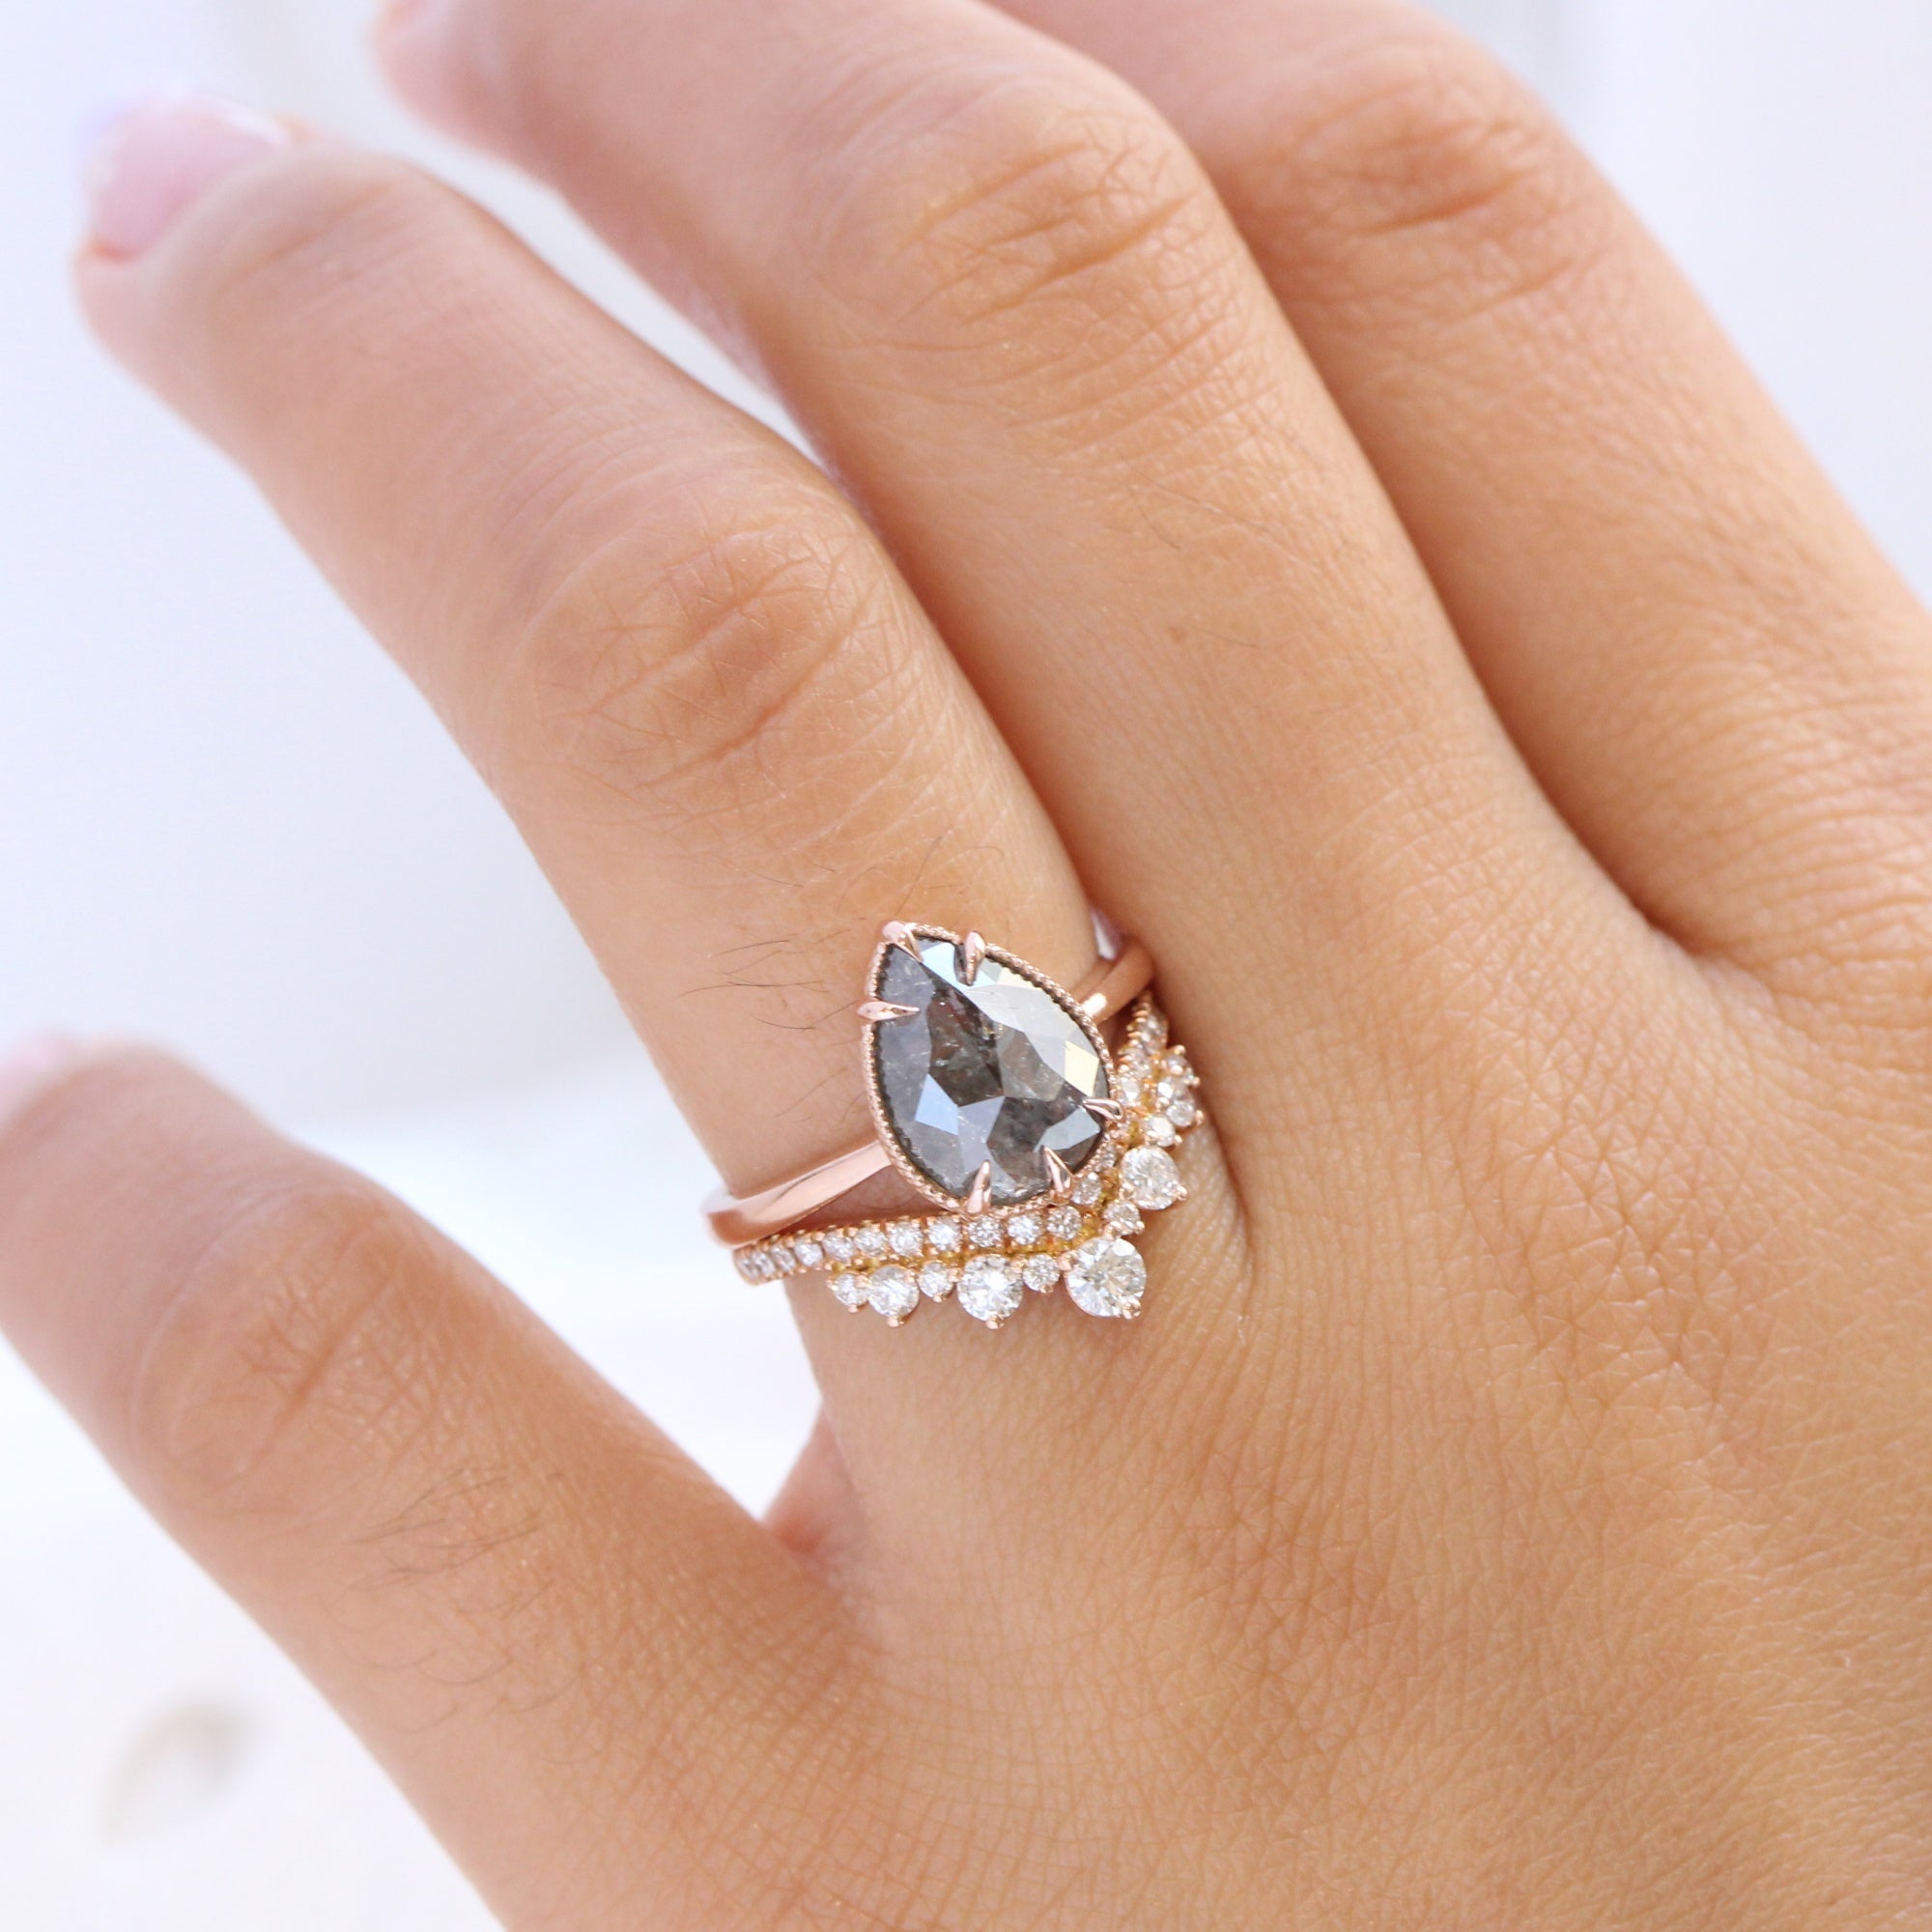 Large salt and pepper diamond ring rose gold solitaire pear ring la more design jewelry